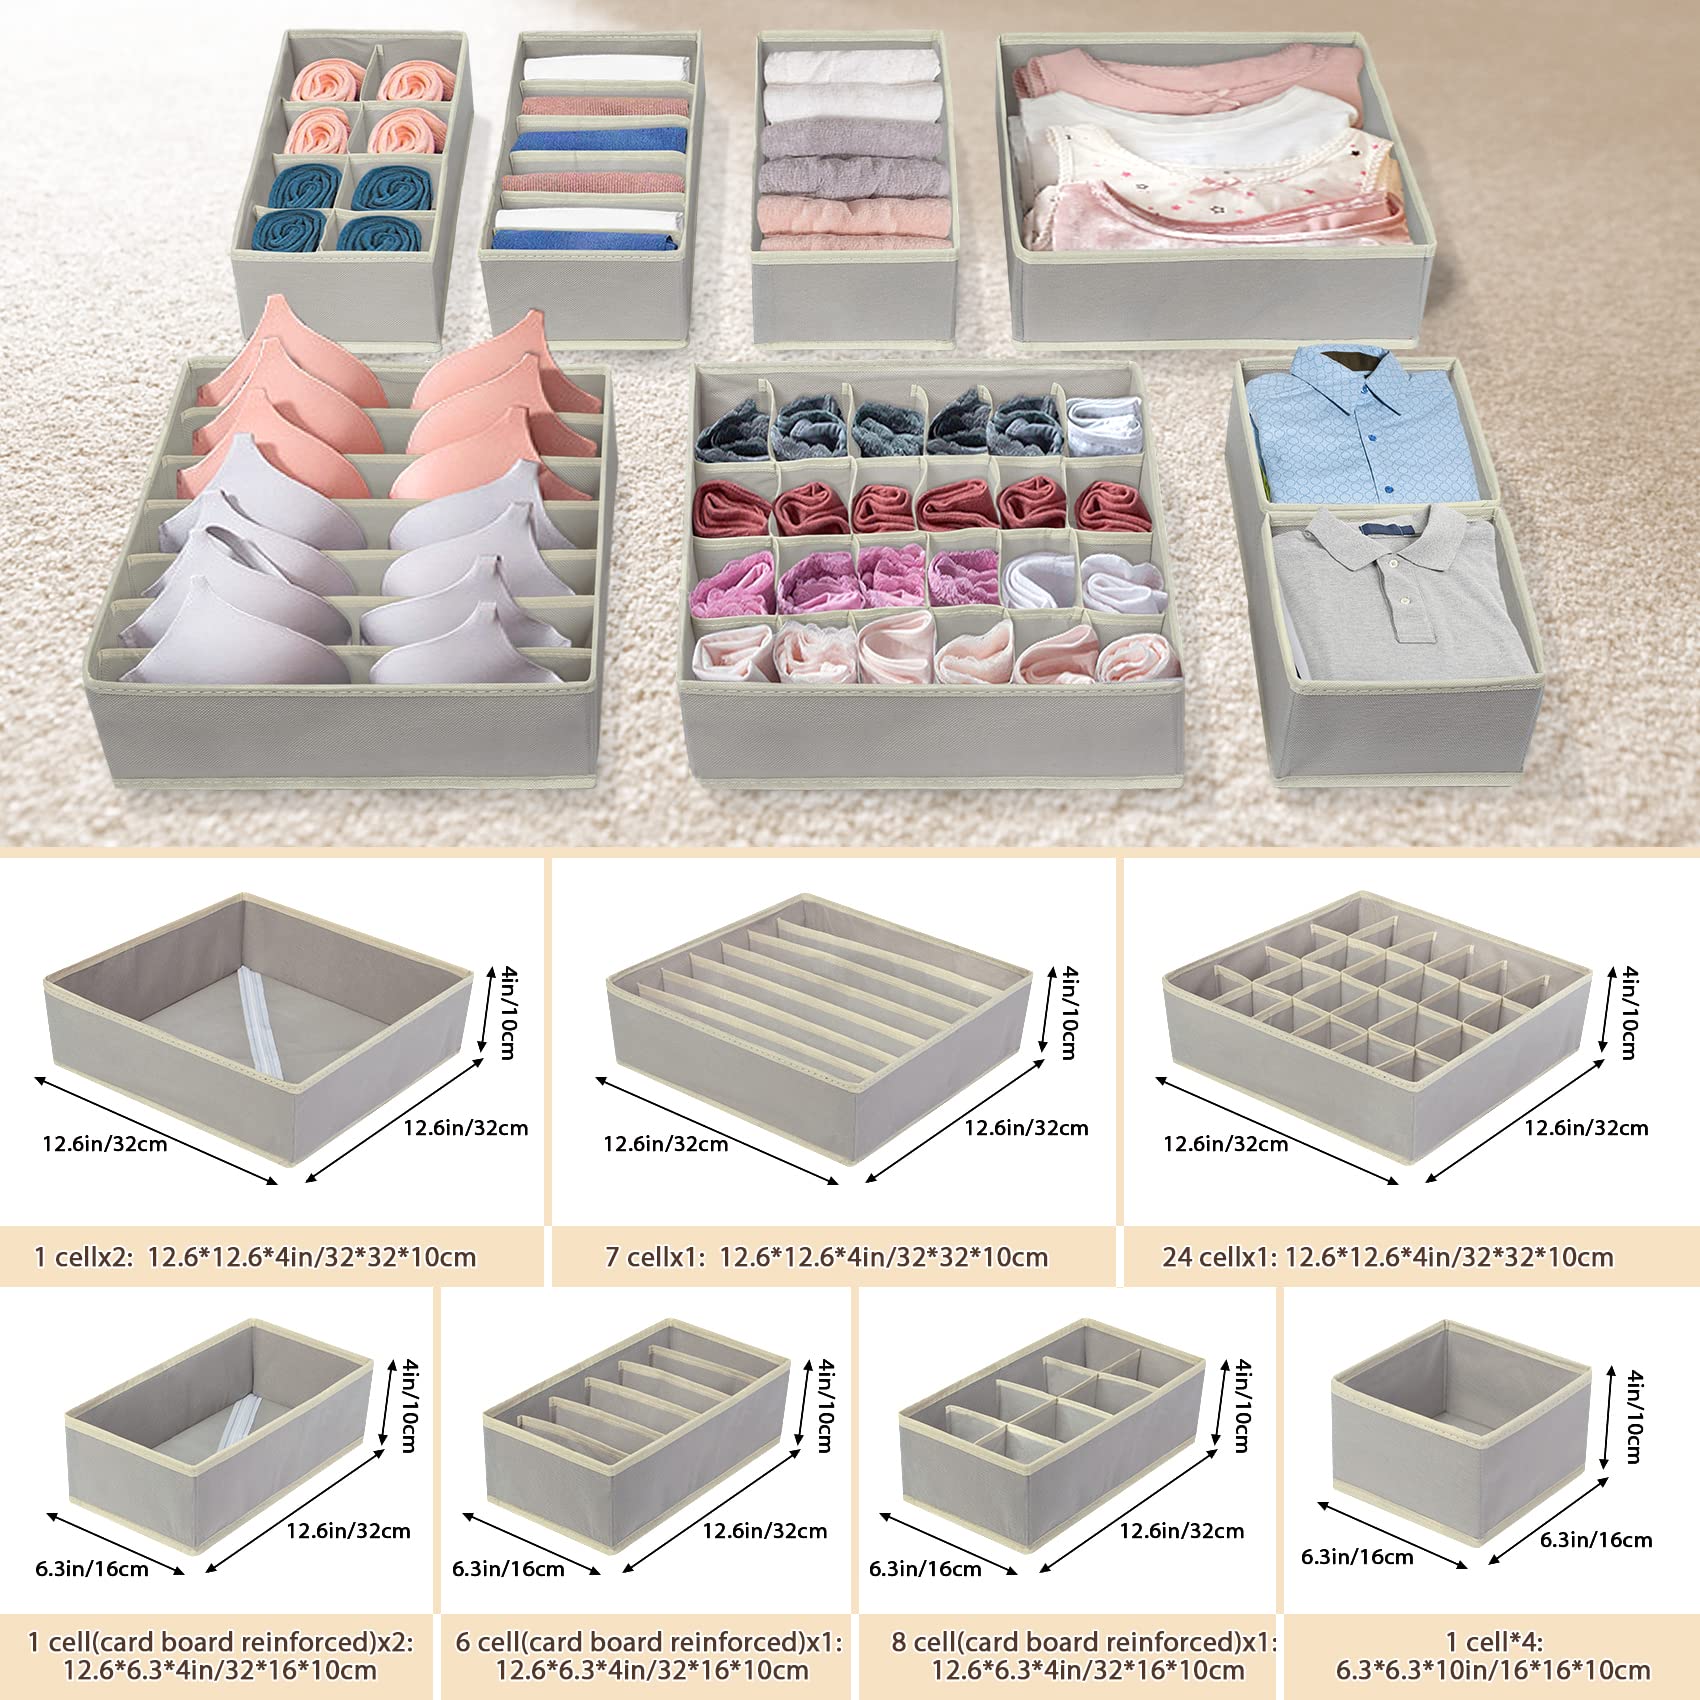 12PCS Drawer Organizers for Clothing, 53 Cell Bra Sock Underwear Drawer Organizer Fabric Foldable Dresser Drawer Divider Closet Organizers and Storage Boxes for Baby Clothes Bras Socks Lingerie (Grey)